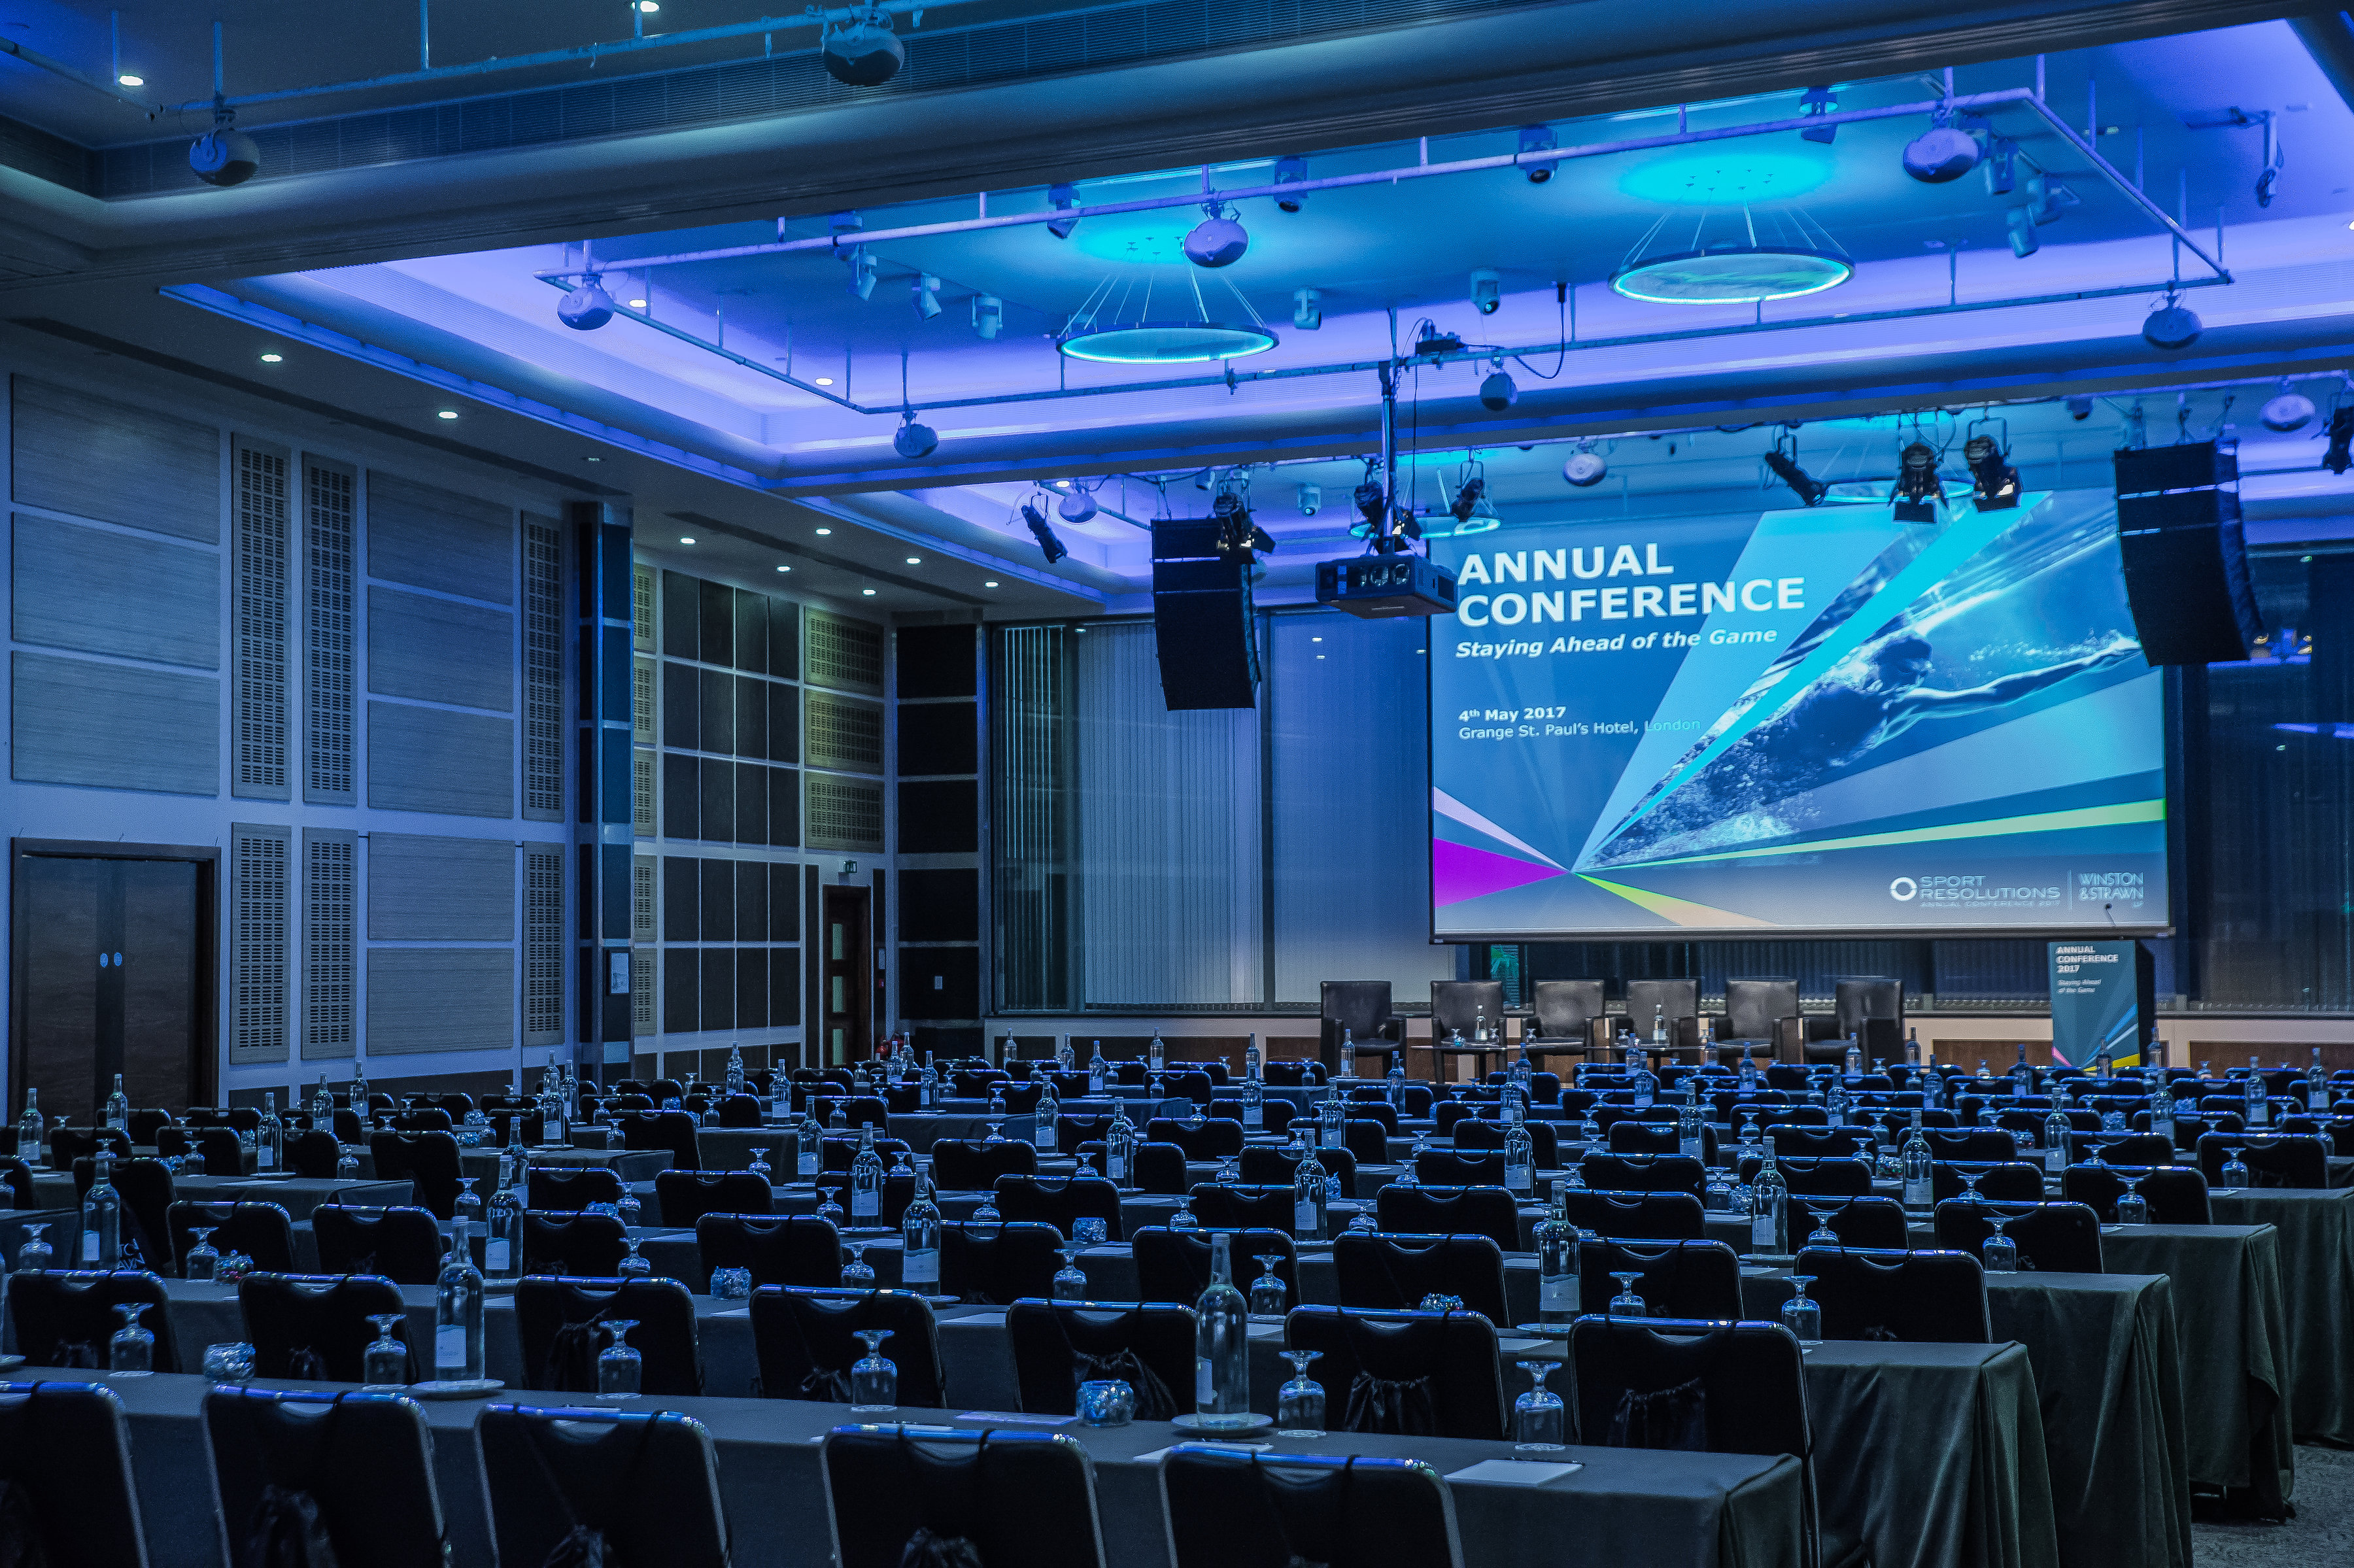 Audio Visual Assets For A Conference Future's Past Events